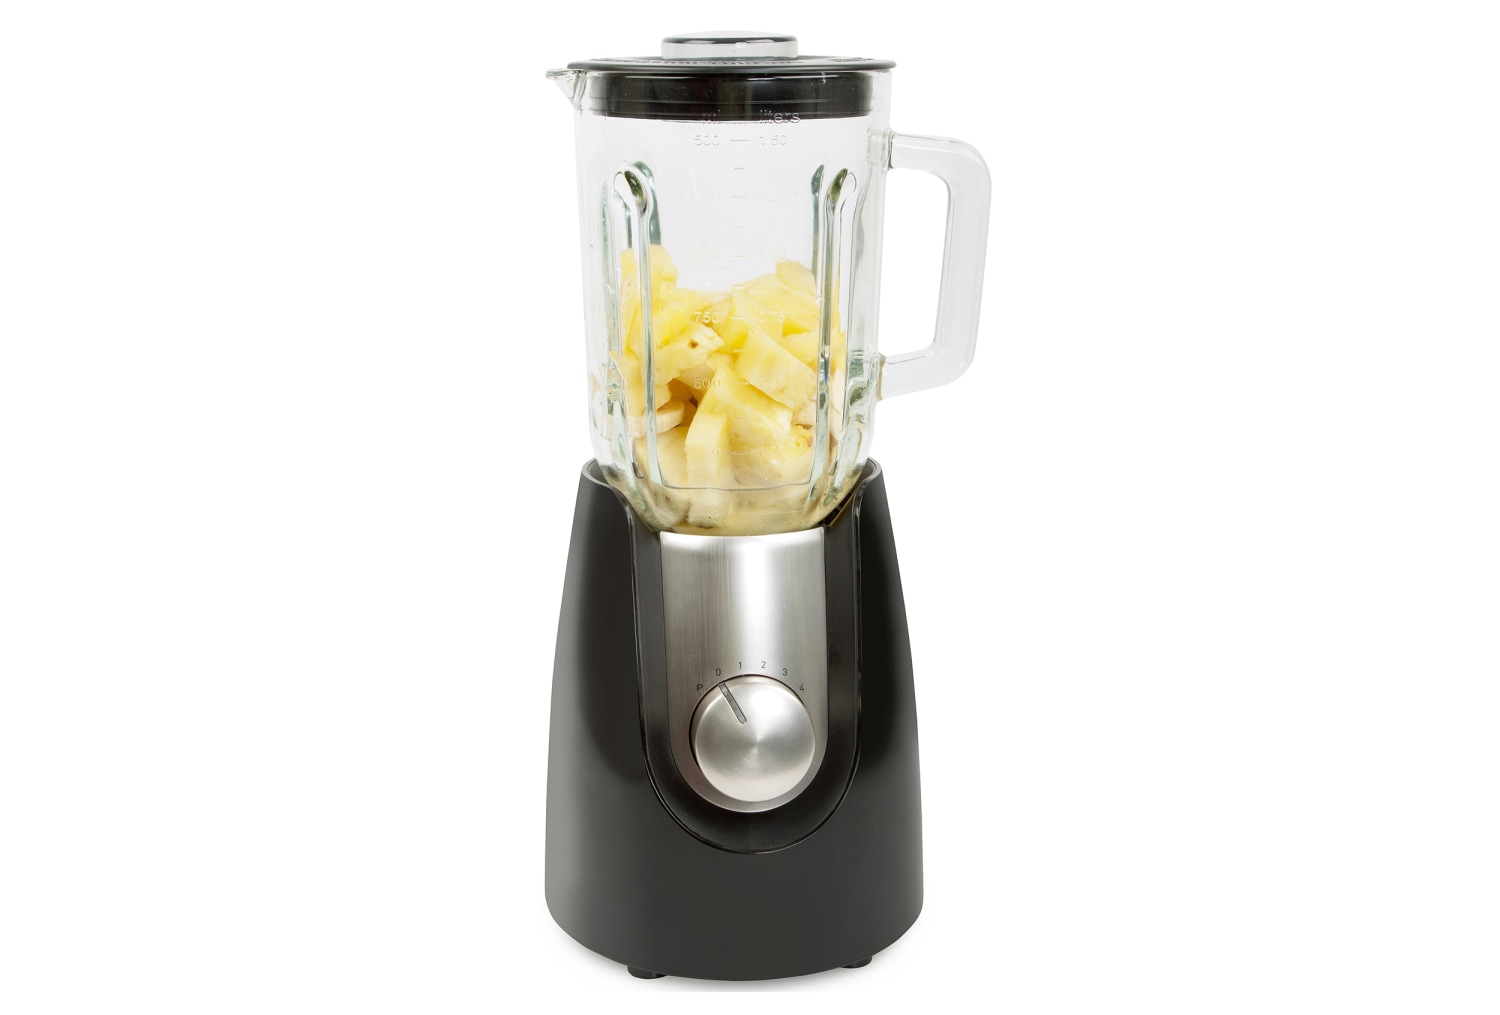 9 smart tips for using your blender to get the smoothies, soups